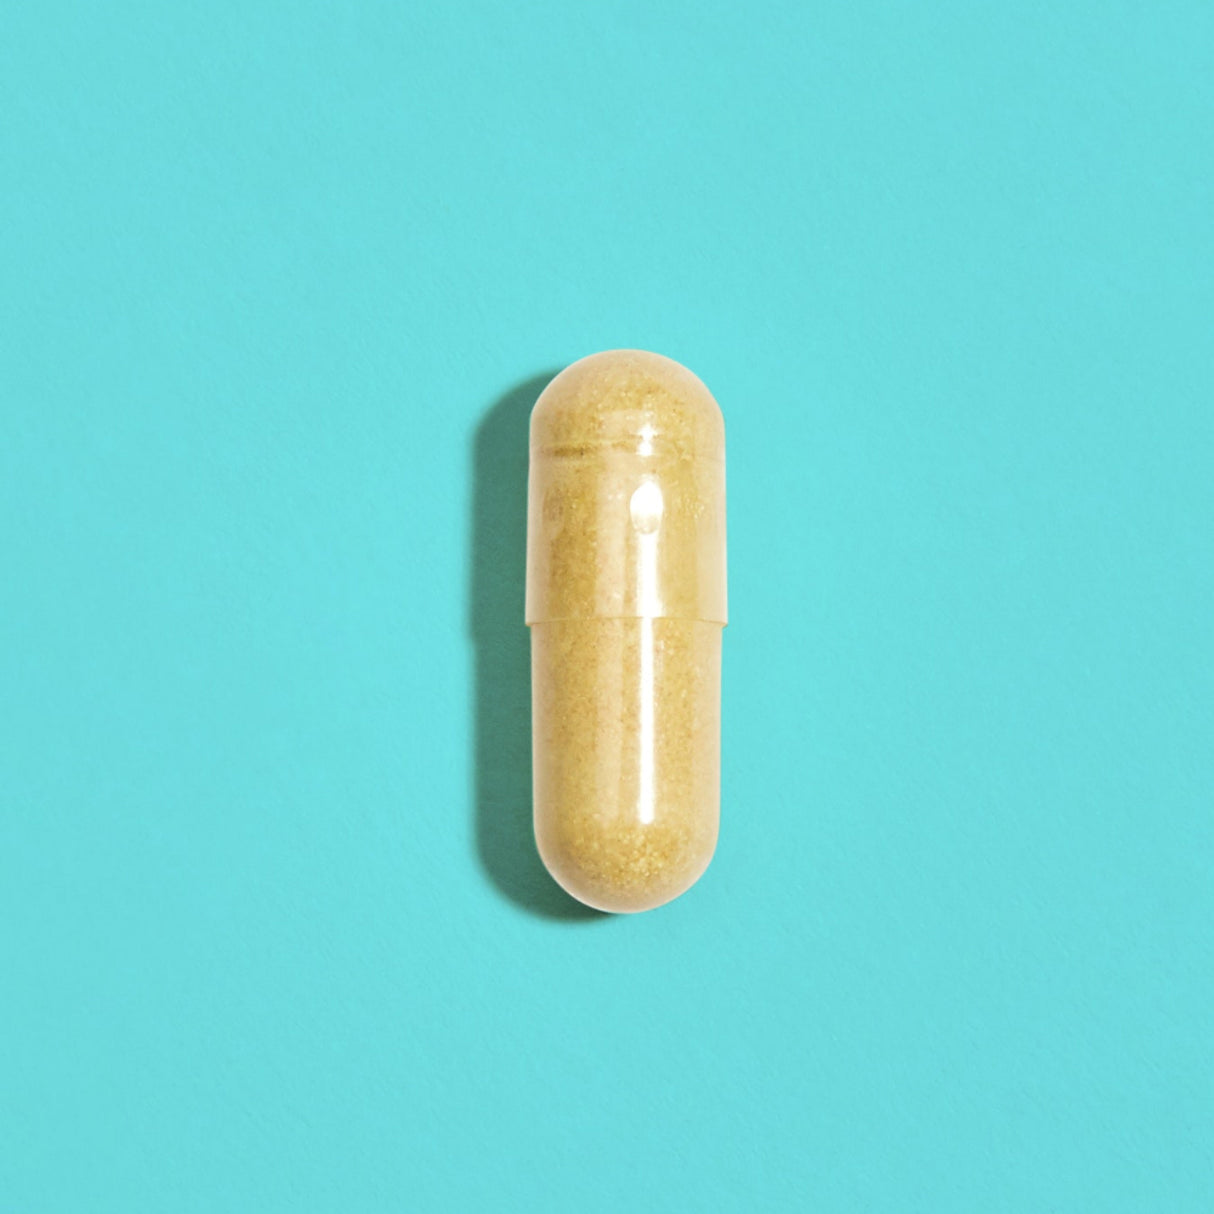 Yellow capsule filled with crushed yellow powder